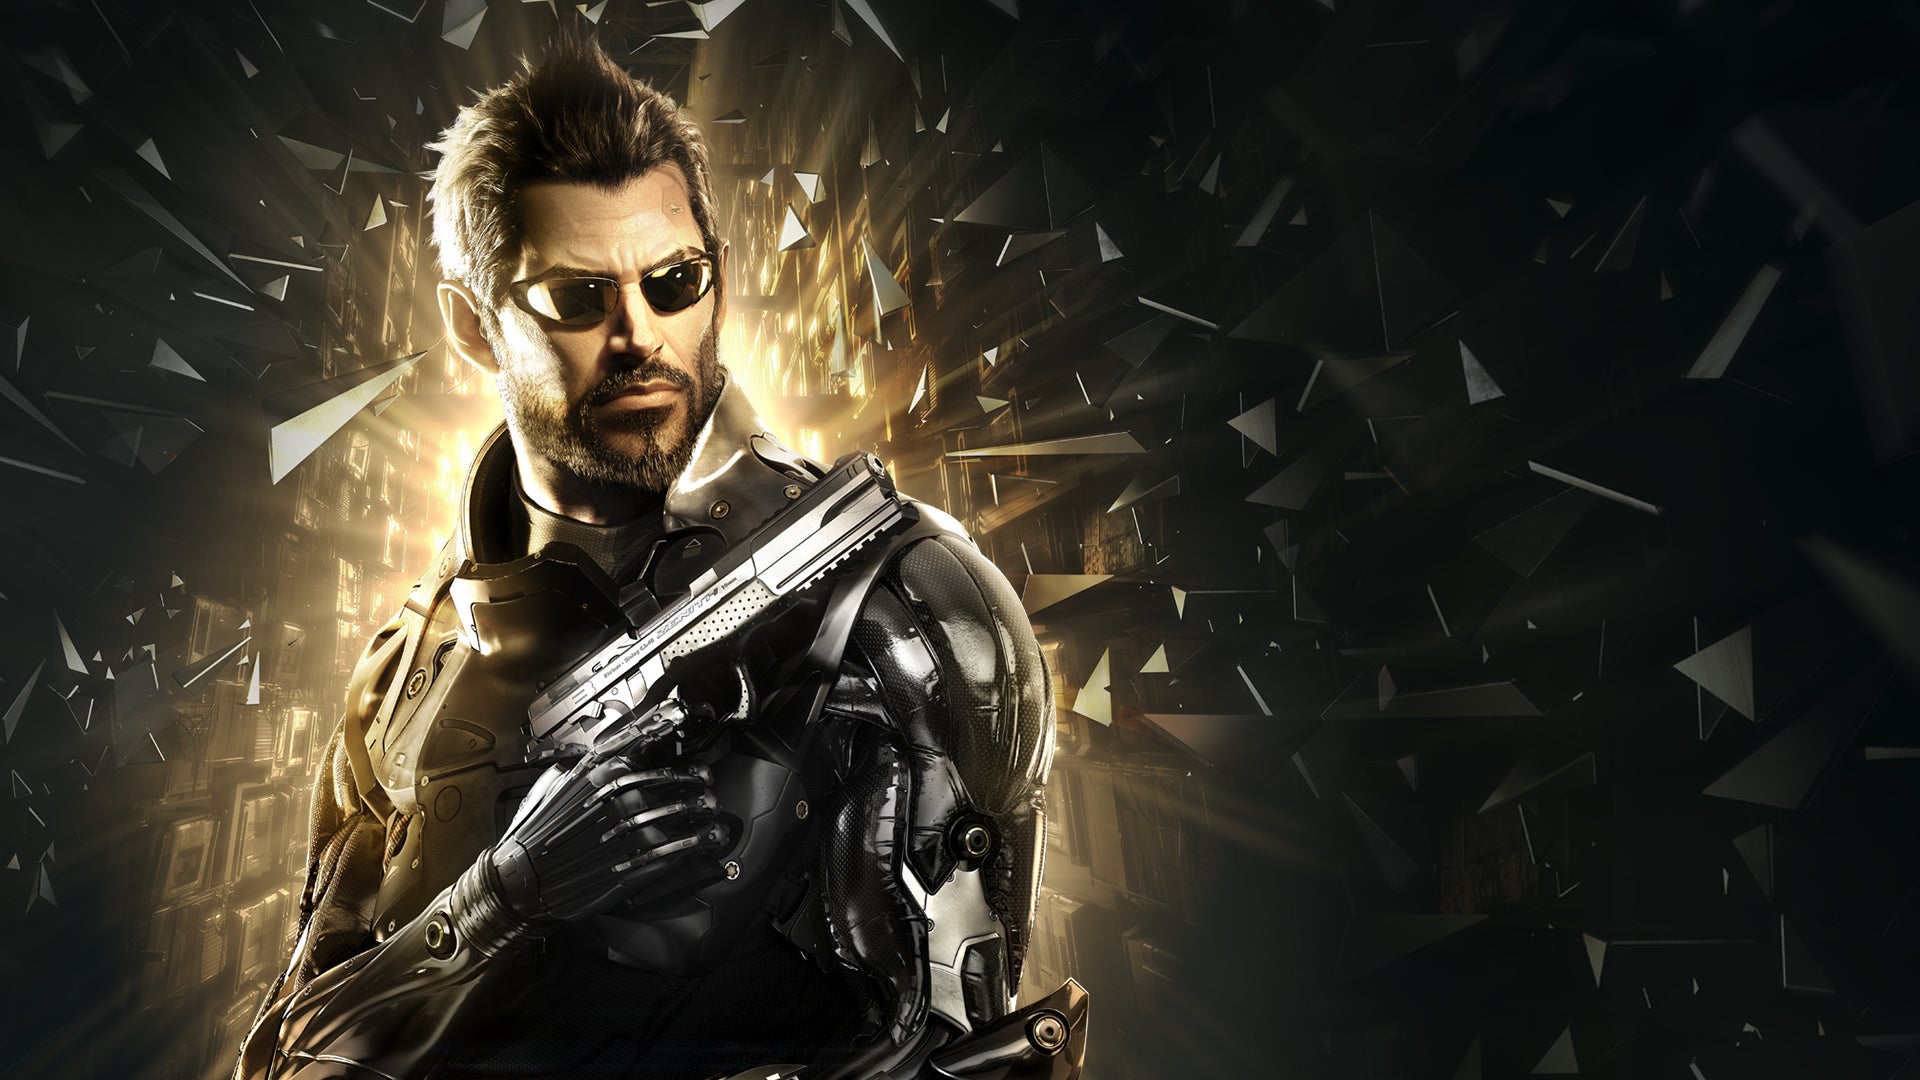 New Deus Ex game reportedly in ‘very very early’ development at Eidos Montreal